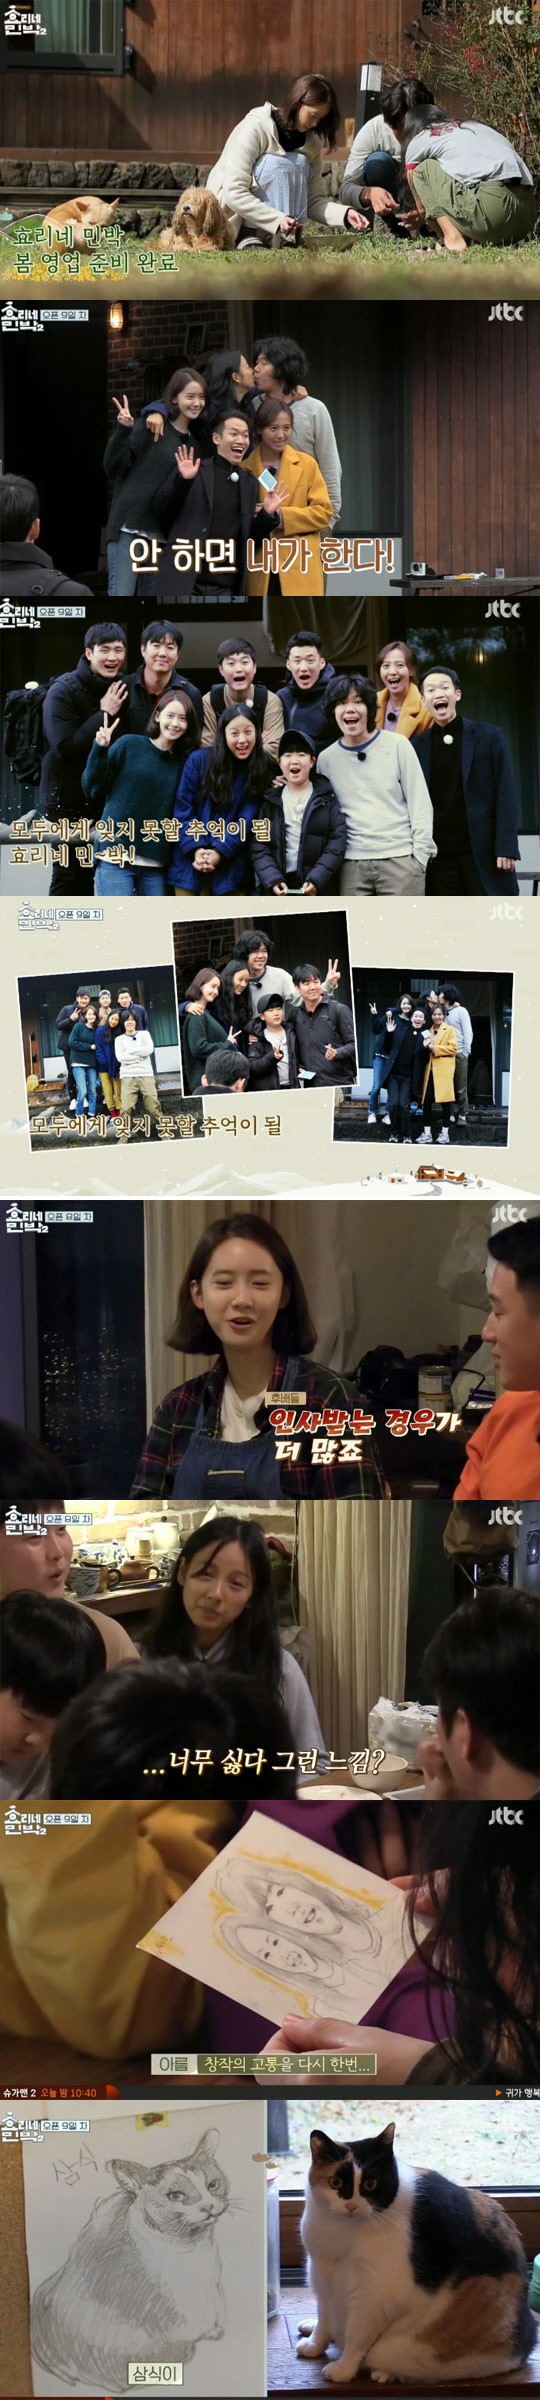 Last night of Hyo Ri 4 Minshuku 2, it was a drunk time to sing and rain, talk.On 15th JTBC Hyori 4 Minshuku 2, the appearance of Yoona, Lee Hyo ri, Sang Soon which the explosion exploded for the spring rain was broadcast.On this day Yoona helped Sang Soon and got a clear breakfast roll.